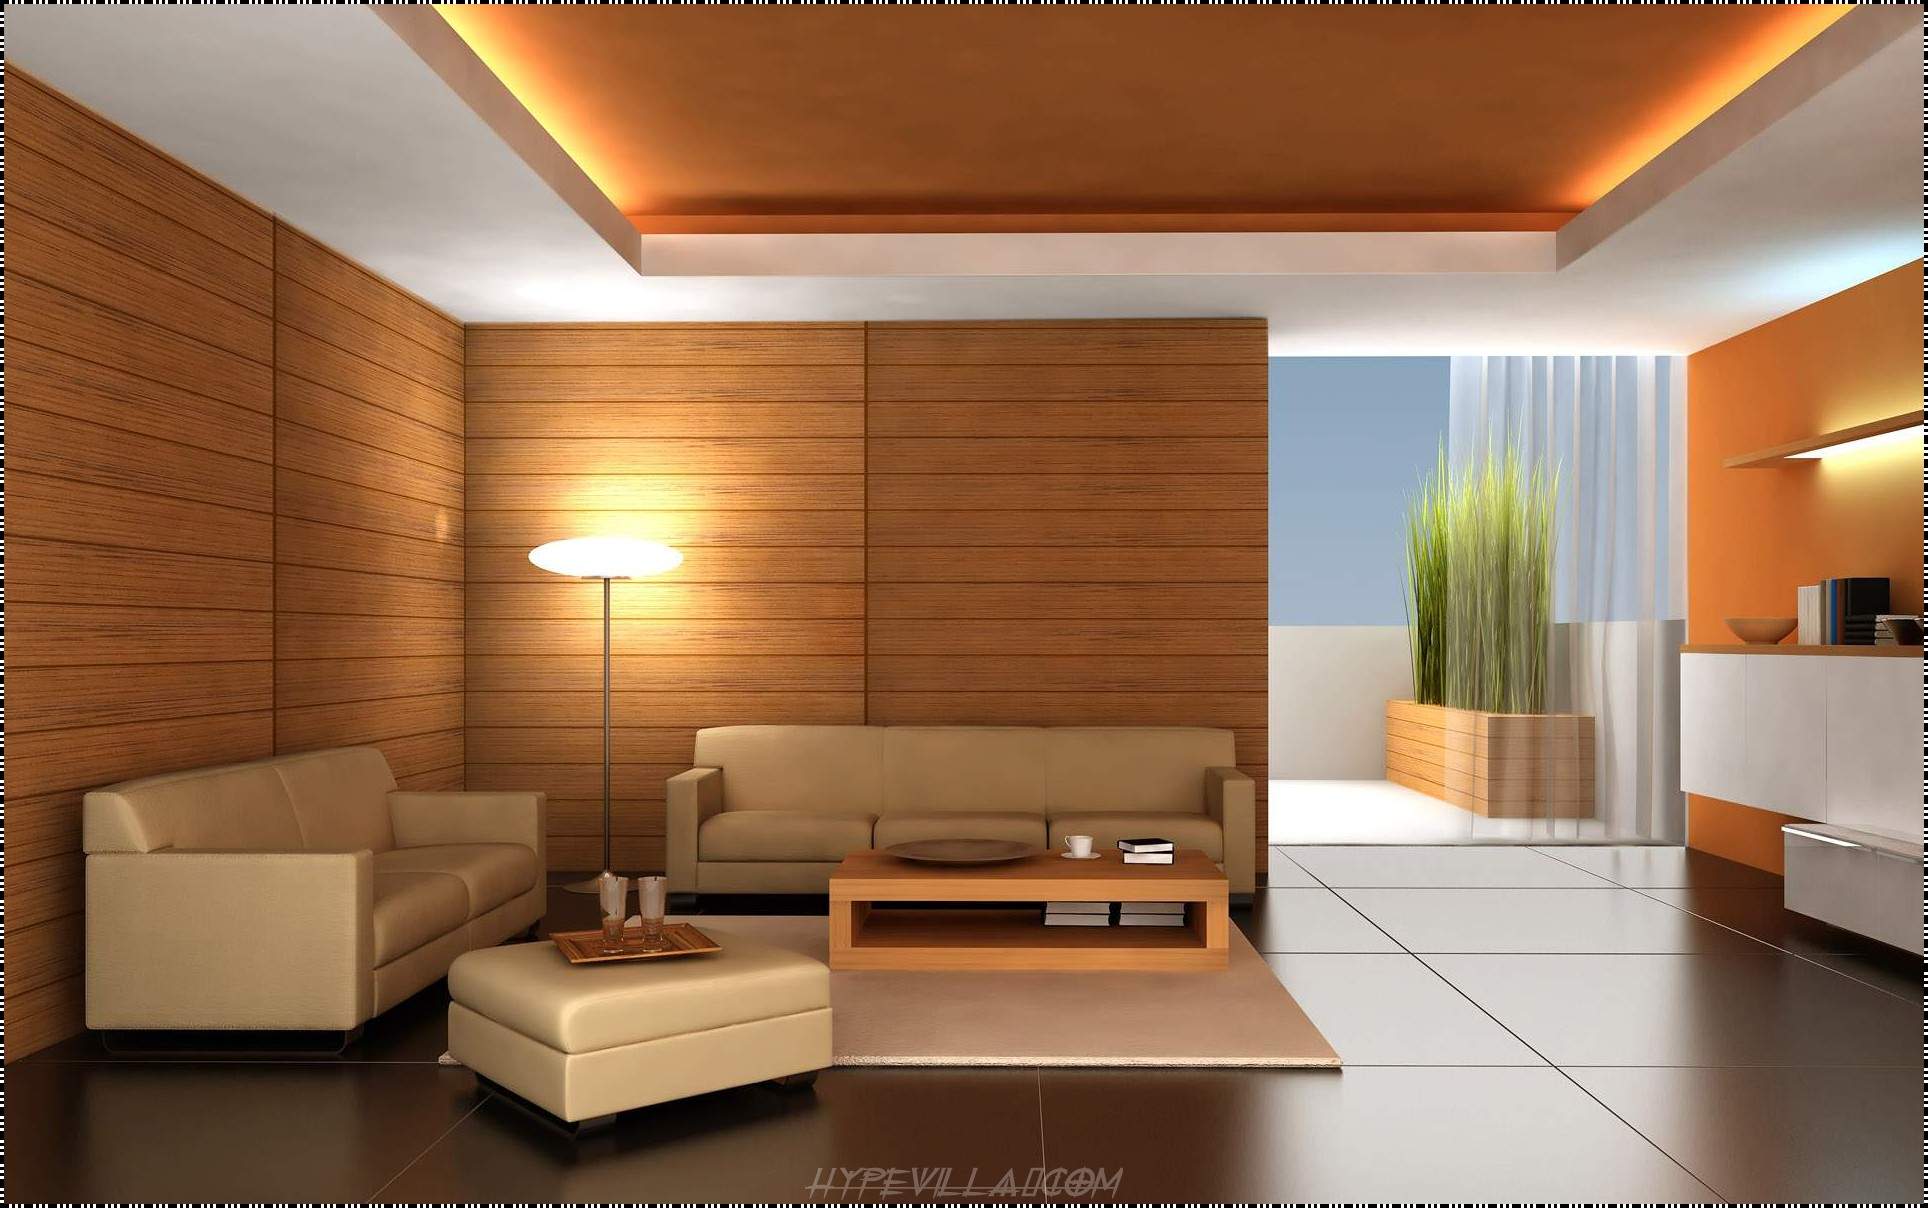 Room home design interior ideas with wallpapers stylish home designs